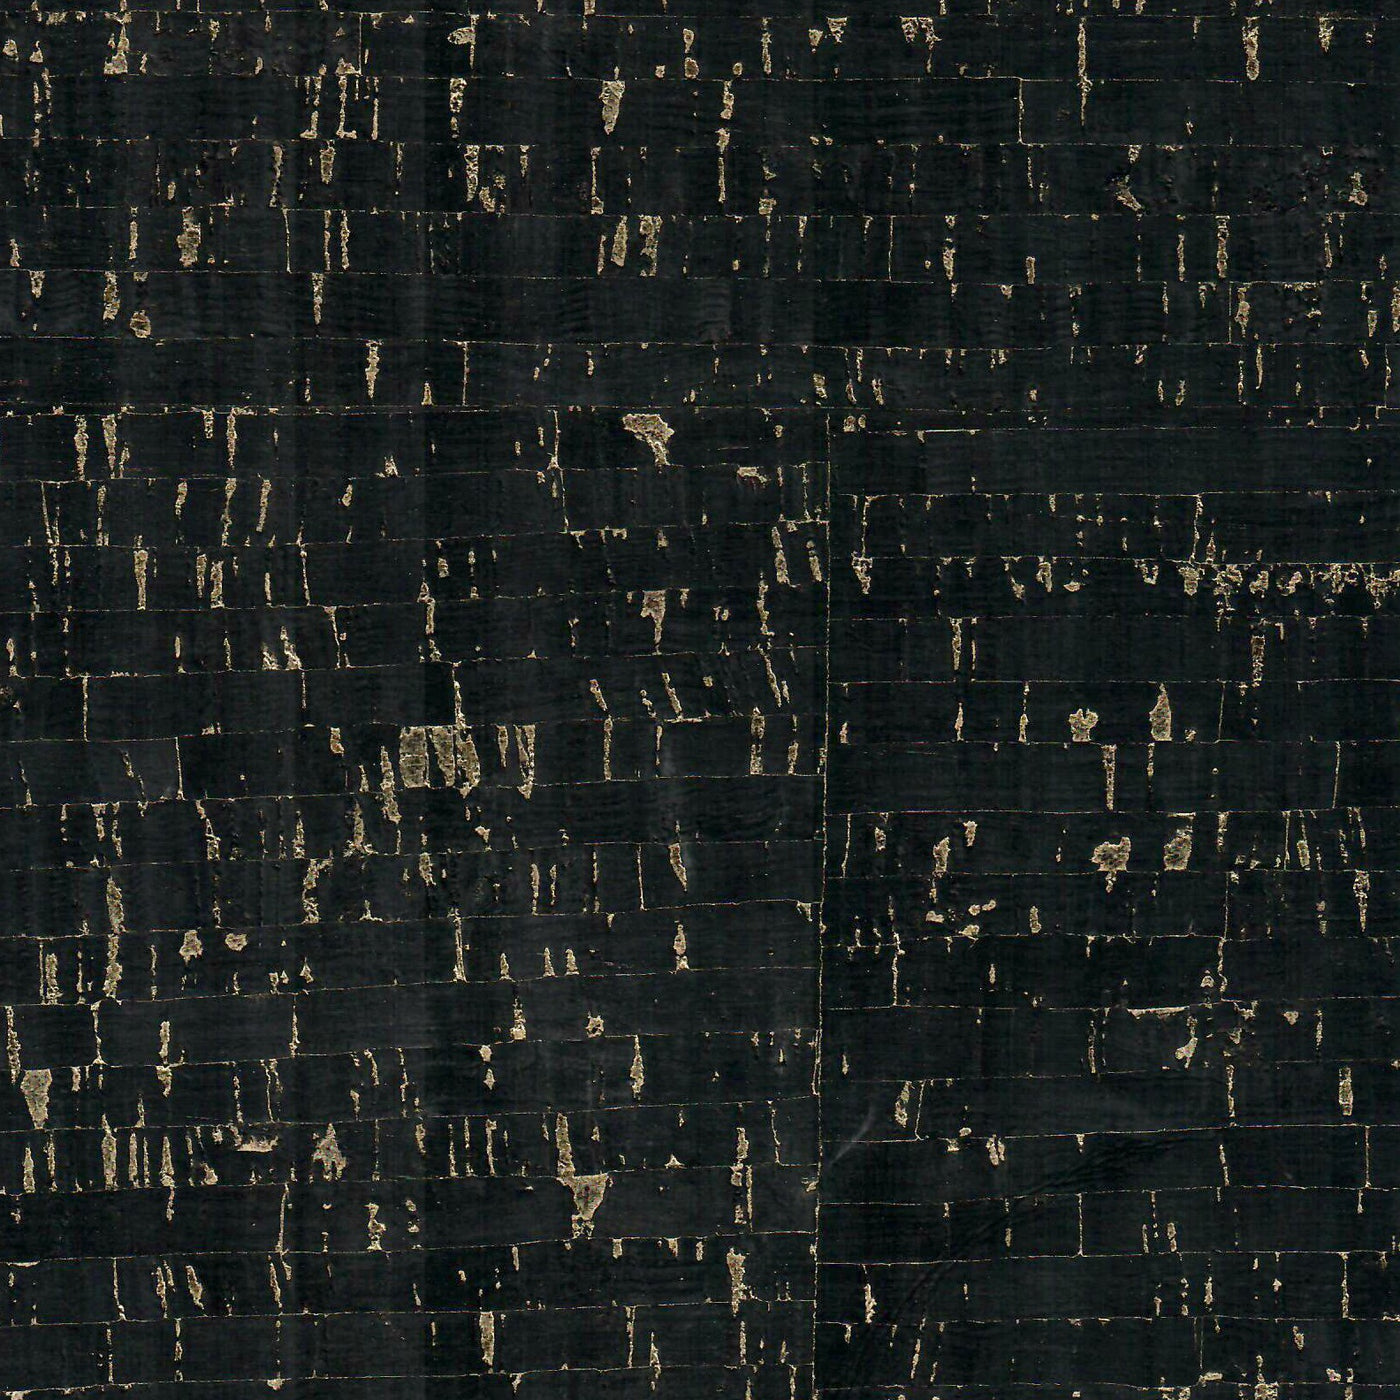 Packaged 1/2 Yard Cut: Rustic Natural Black Gold Flecked Cork Fabric